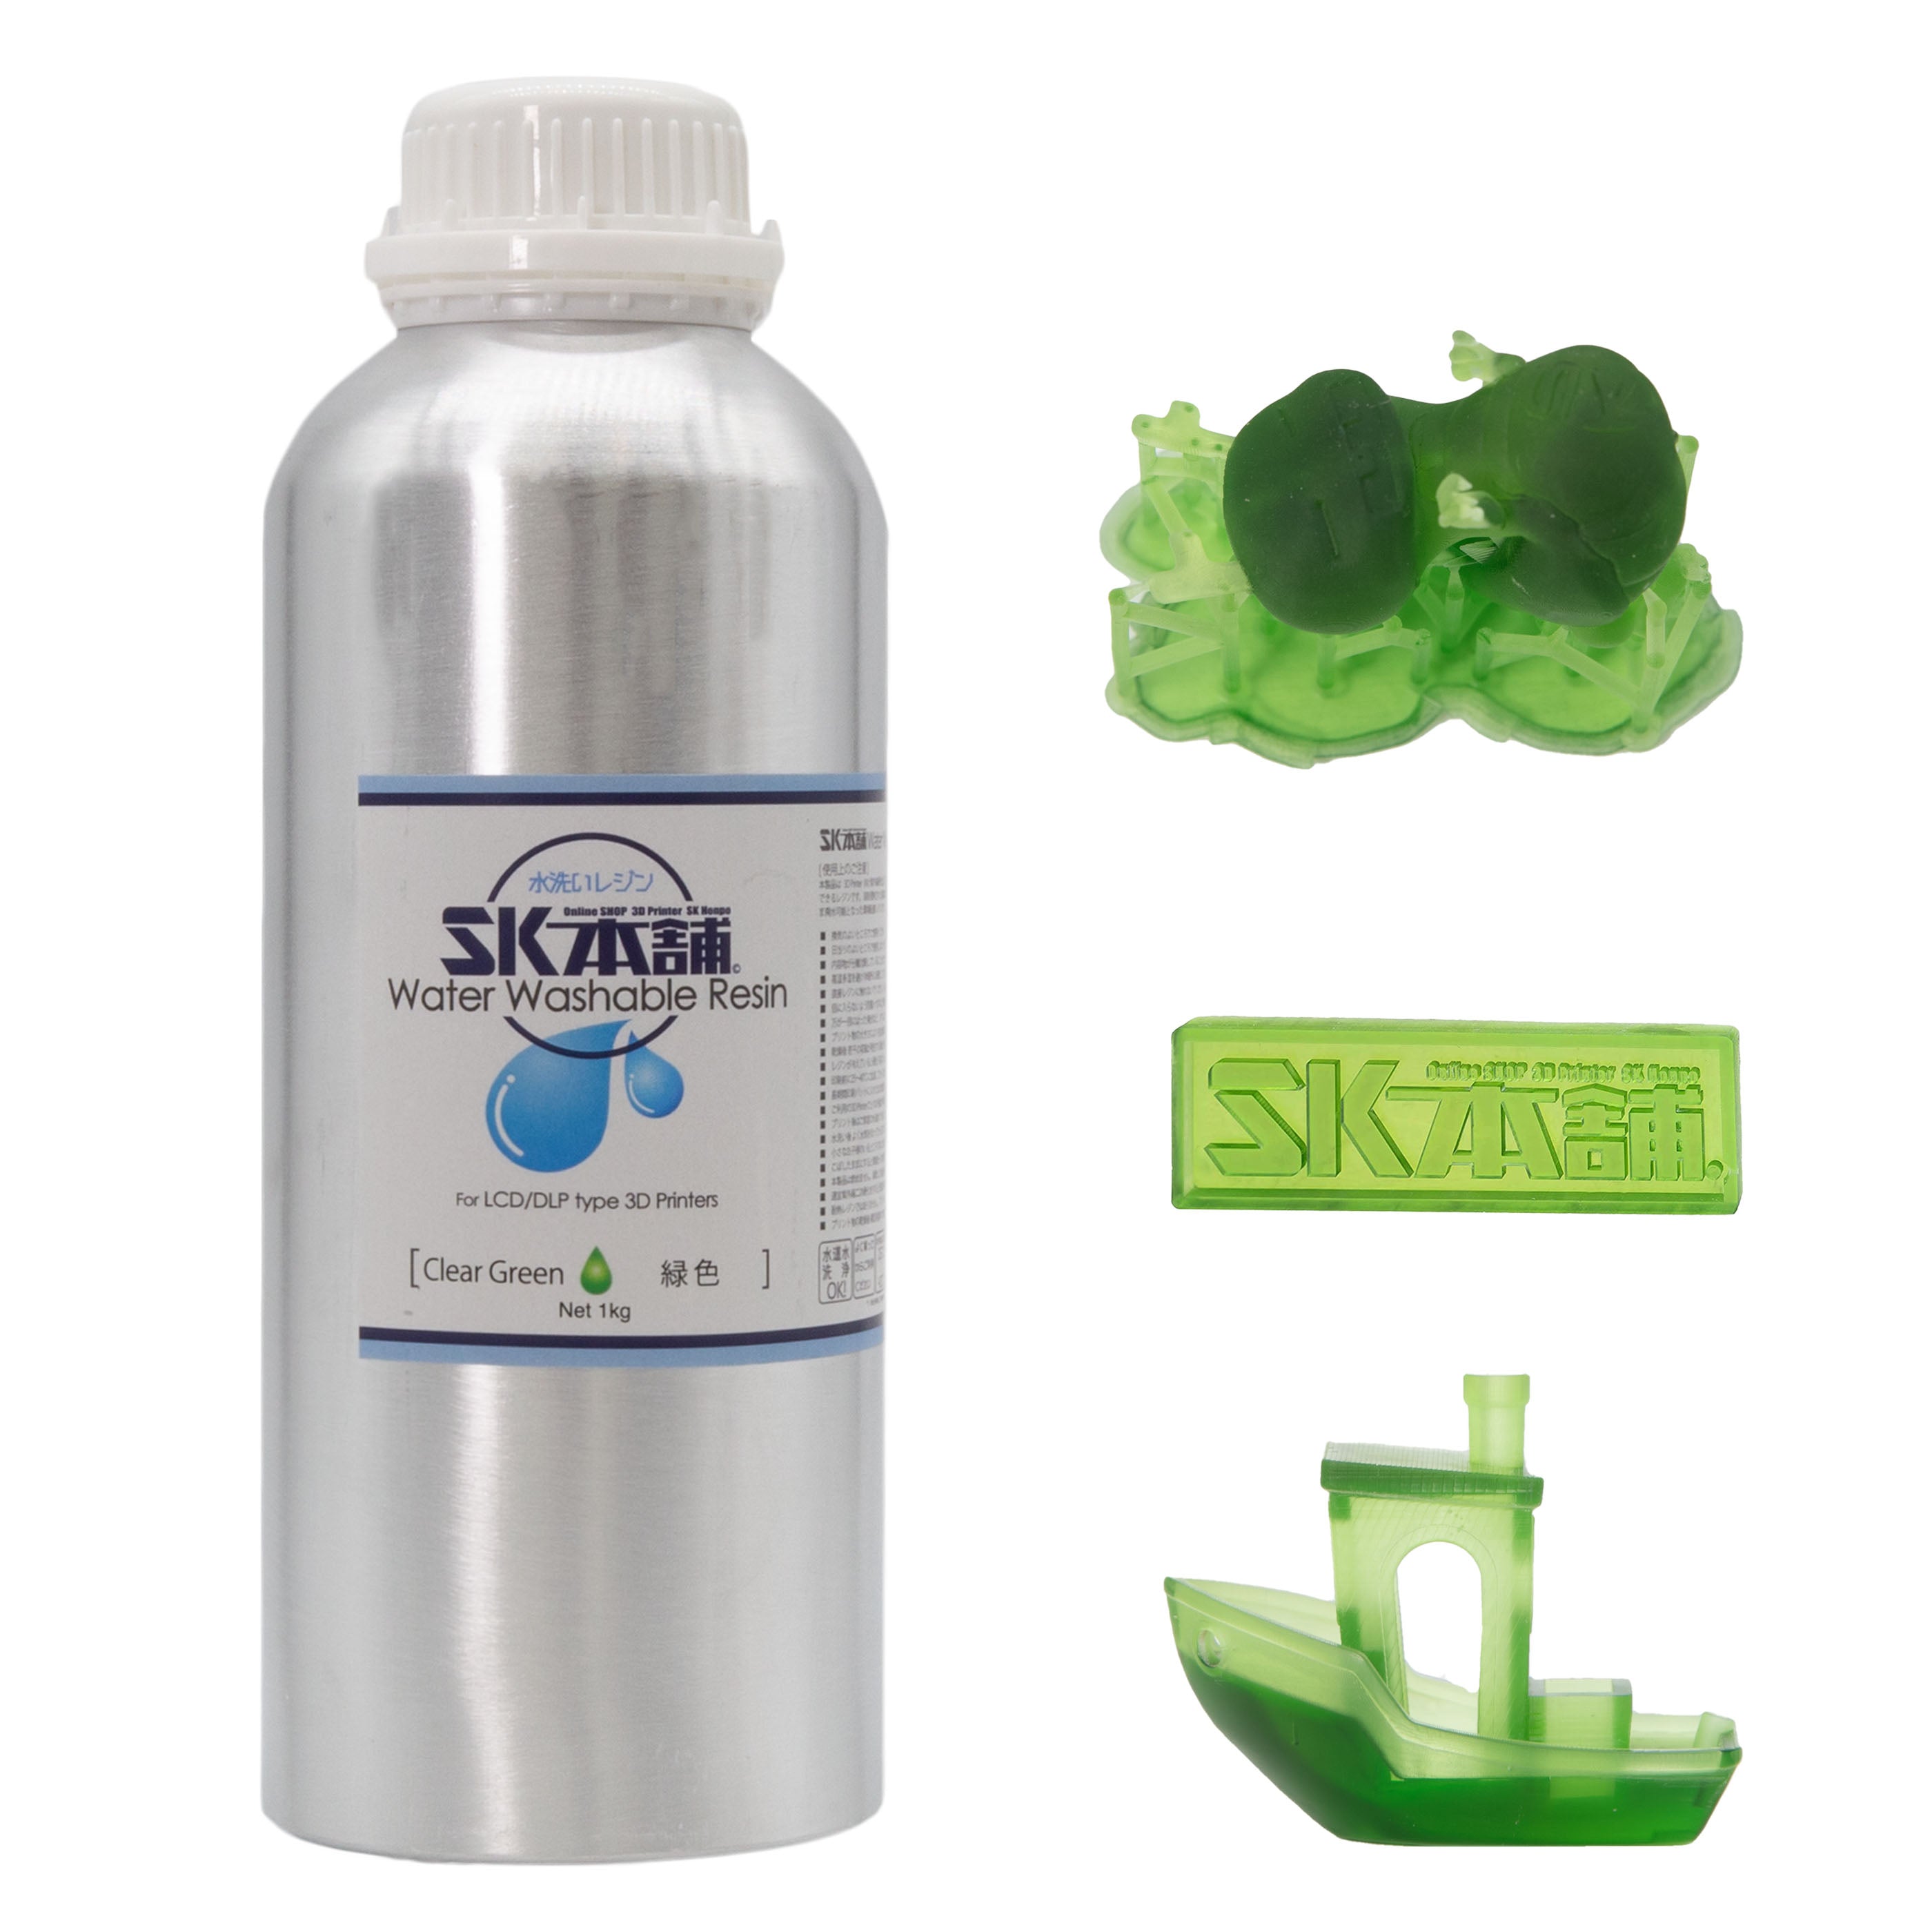 SK Waterwashable Resin clear green_1000g